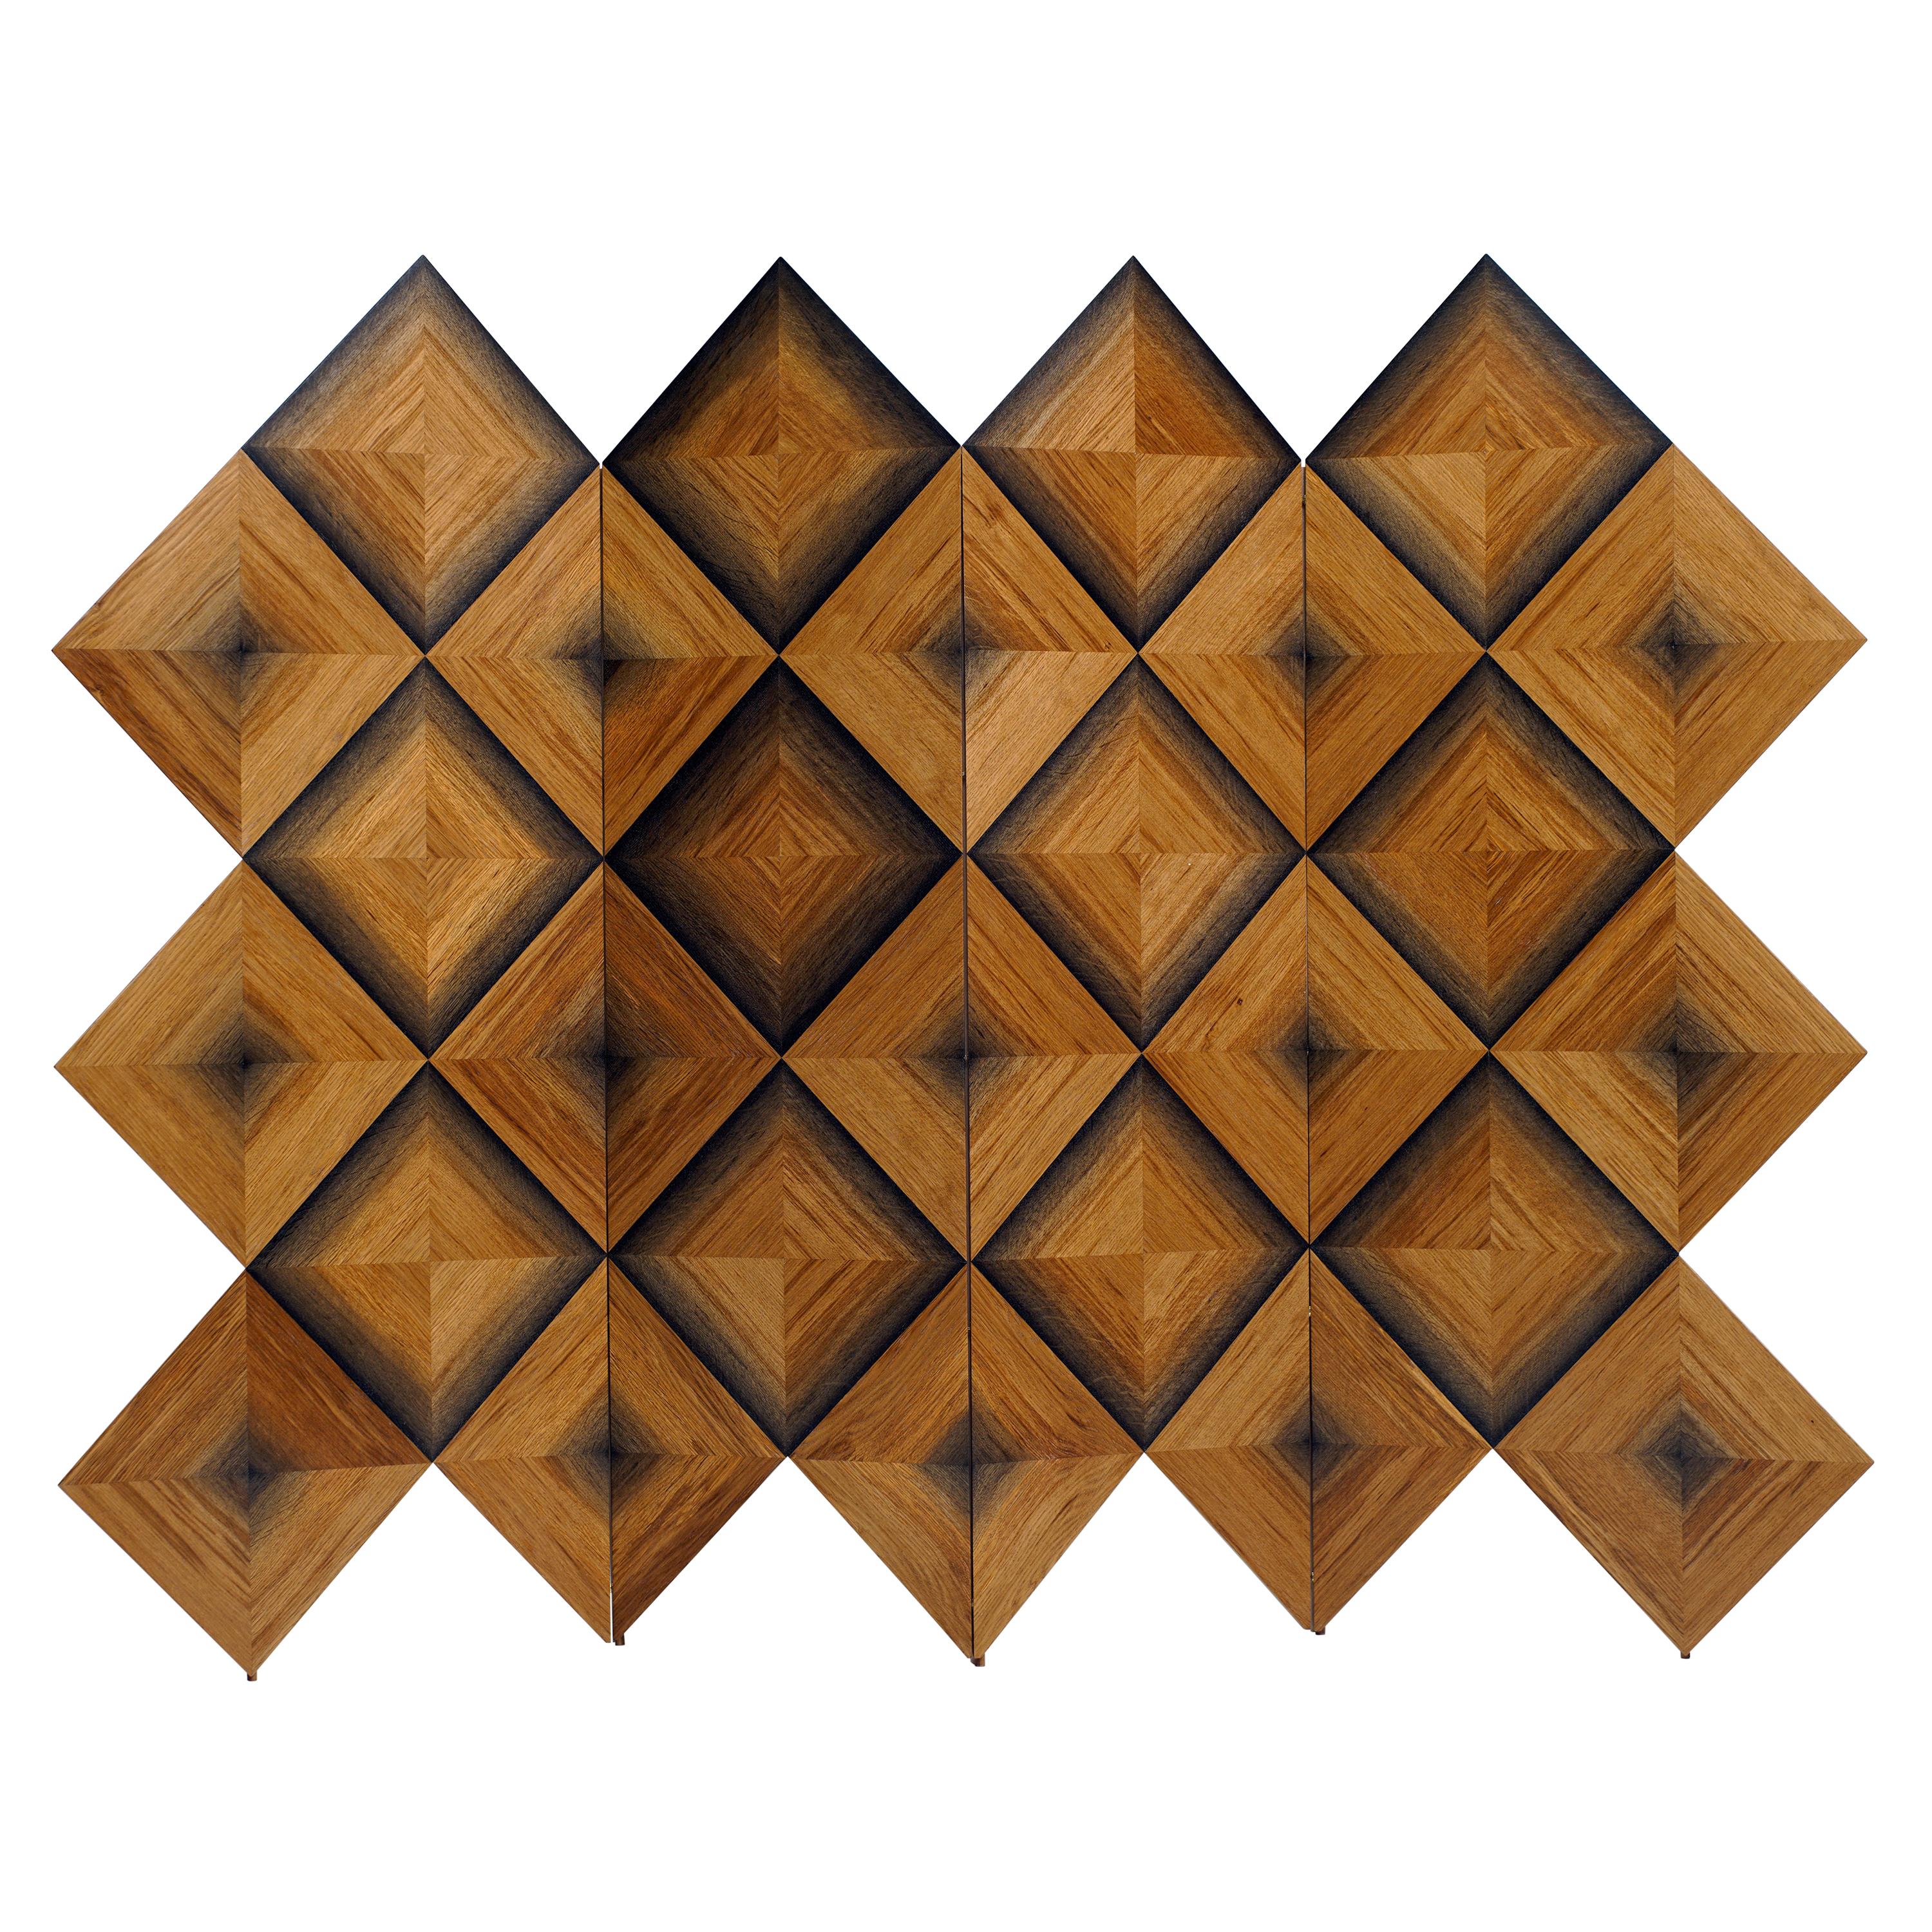 Infinity Square Marquetry 4-Panel Screen in 1, 200 Year-Old Bog Oak